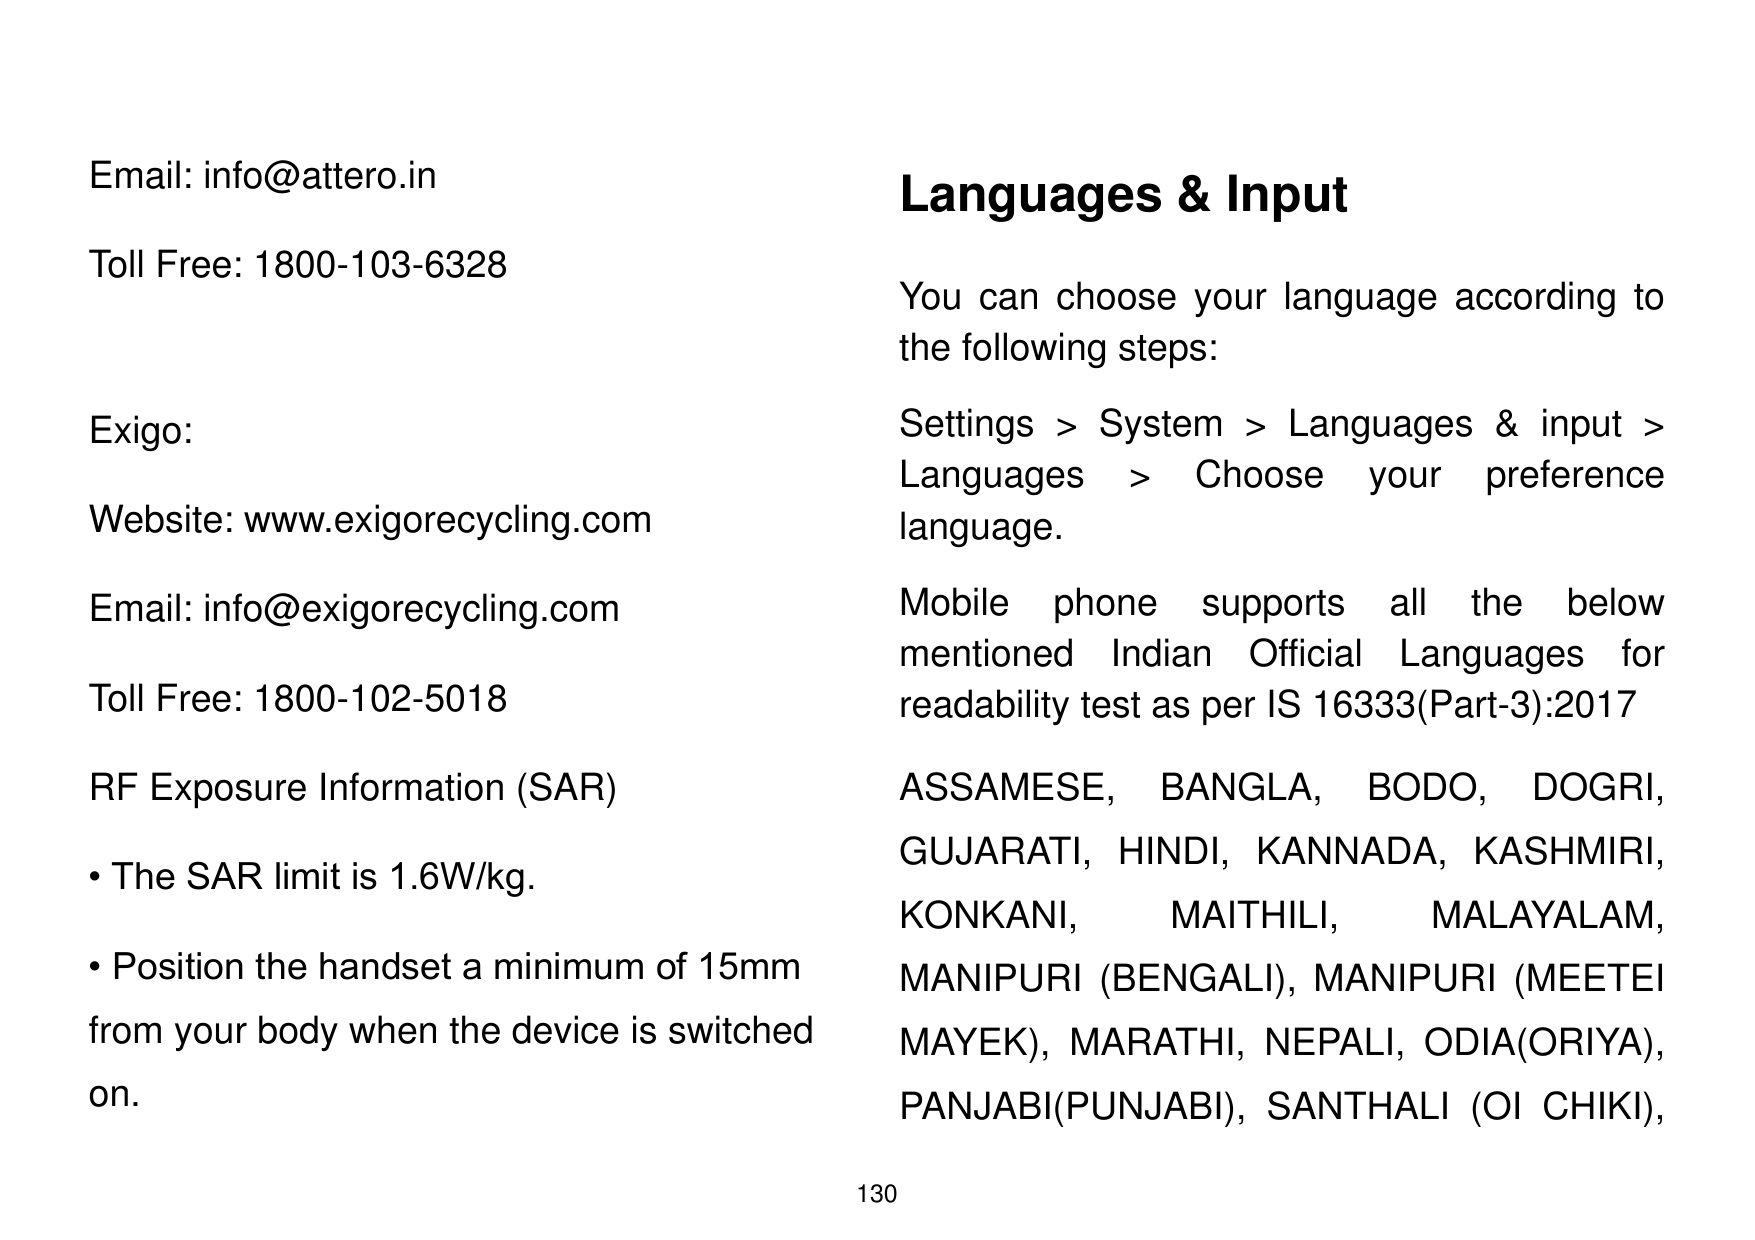 Email: info@attero.inLanguages & InputToll Free: 1800-103-6328You can choose your language according tothe following steps:Setti